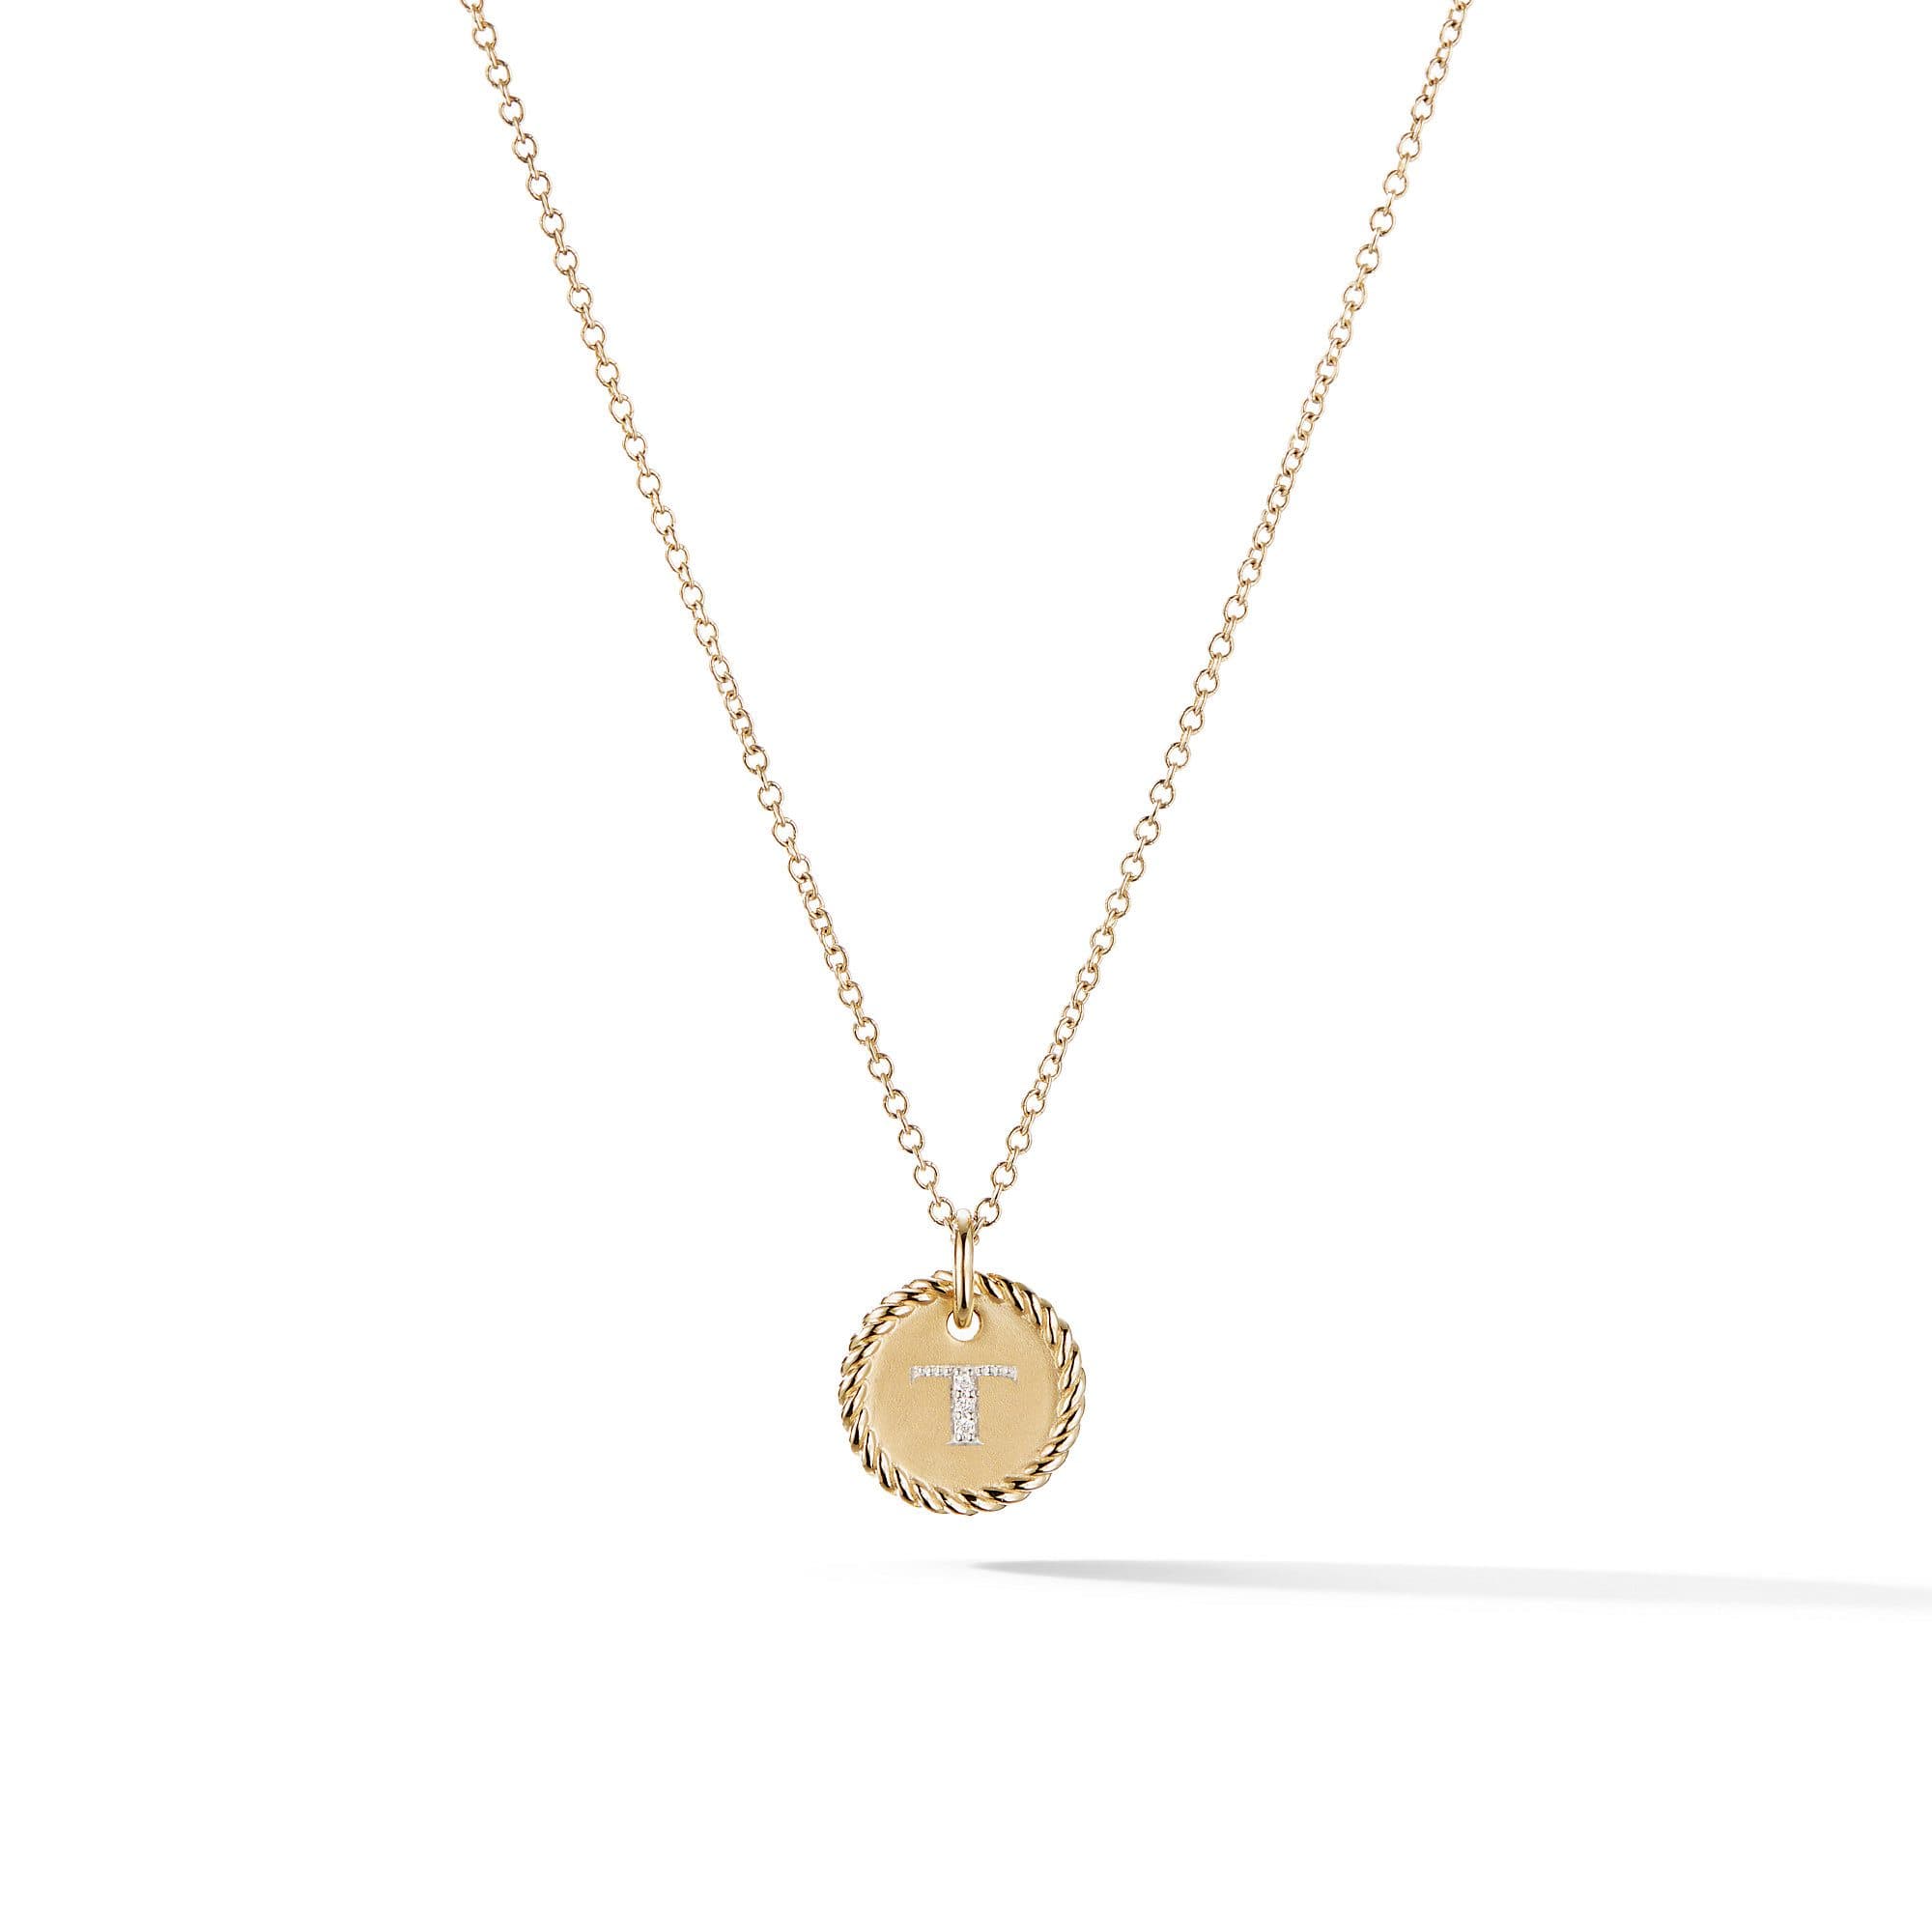 David Yurman T Initial Charm Necklace in 18k Yellow Gold with Diamonds